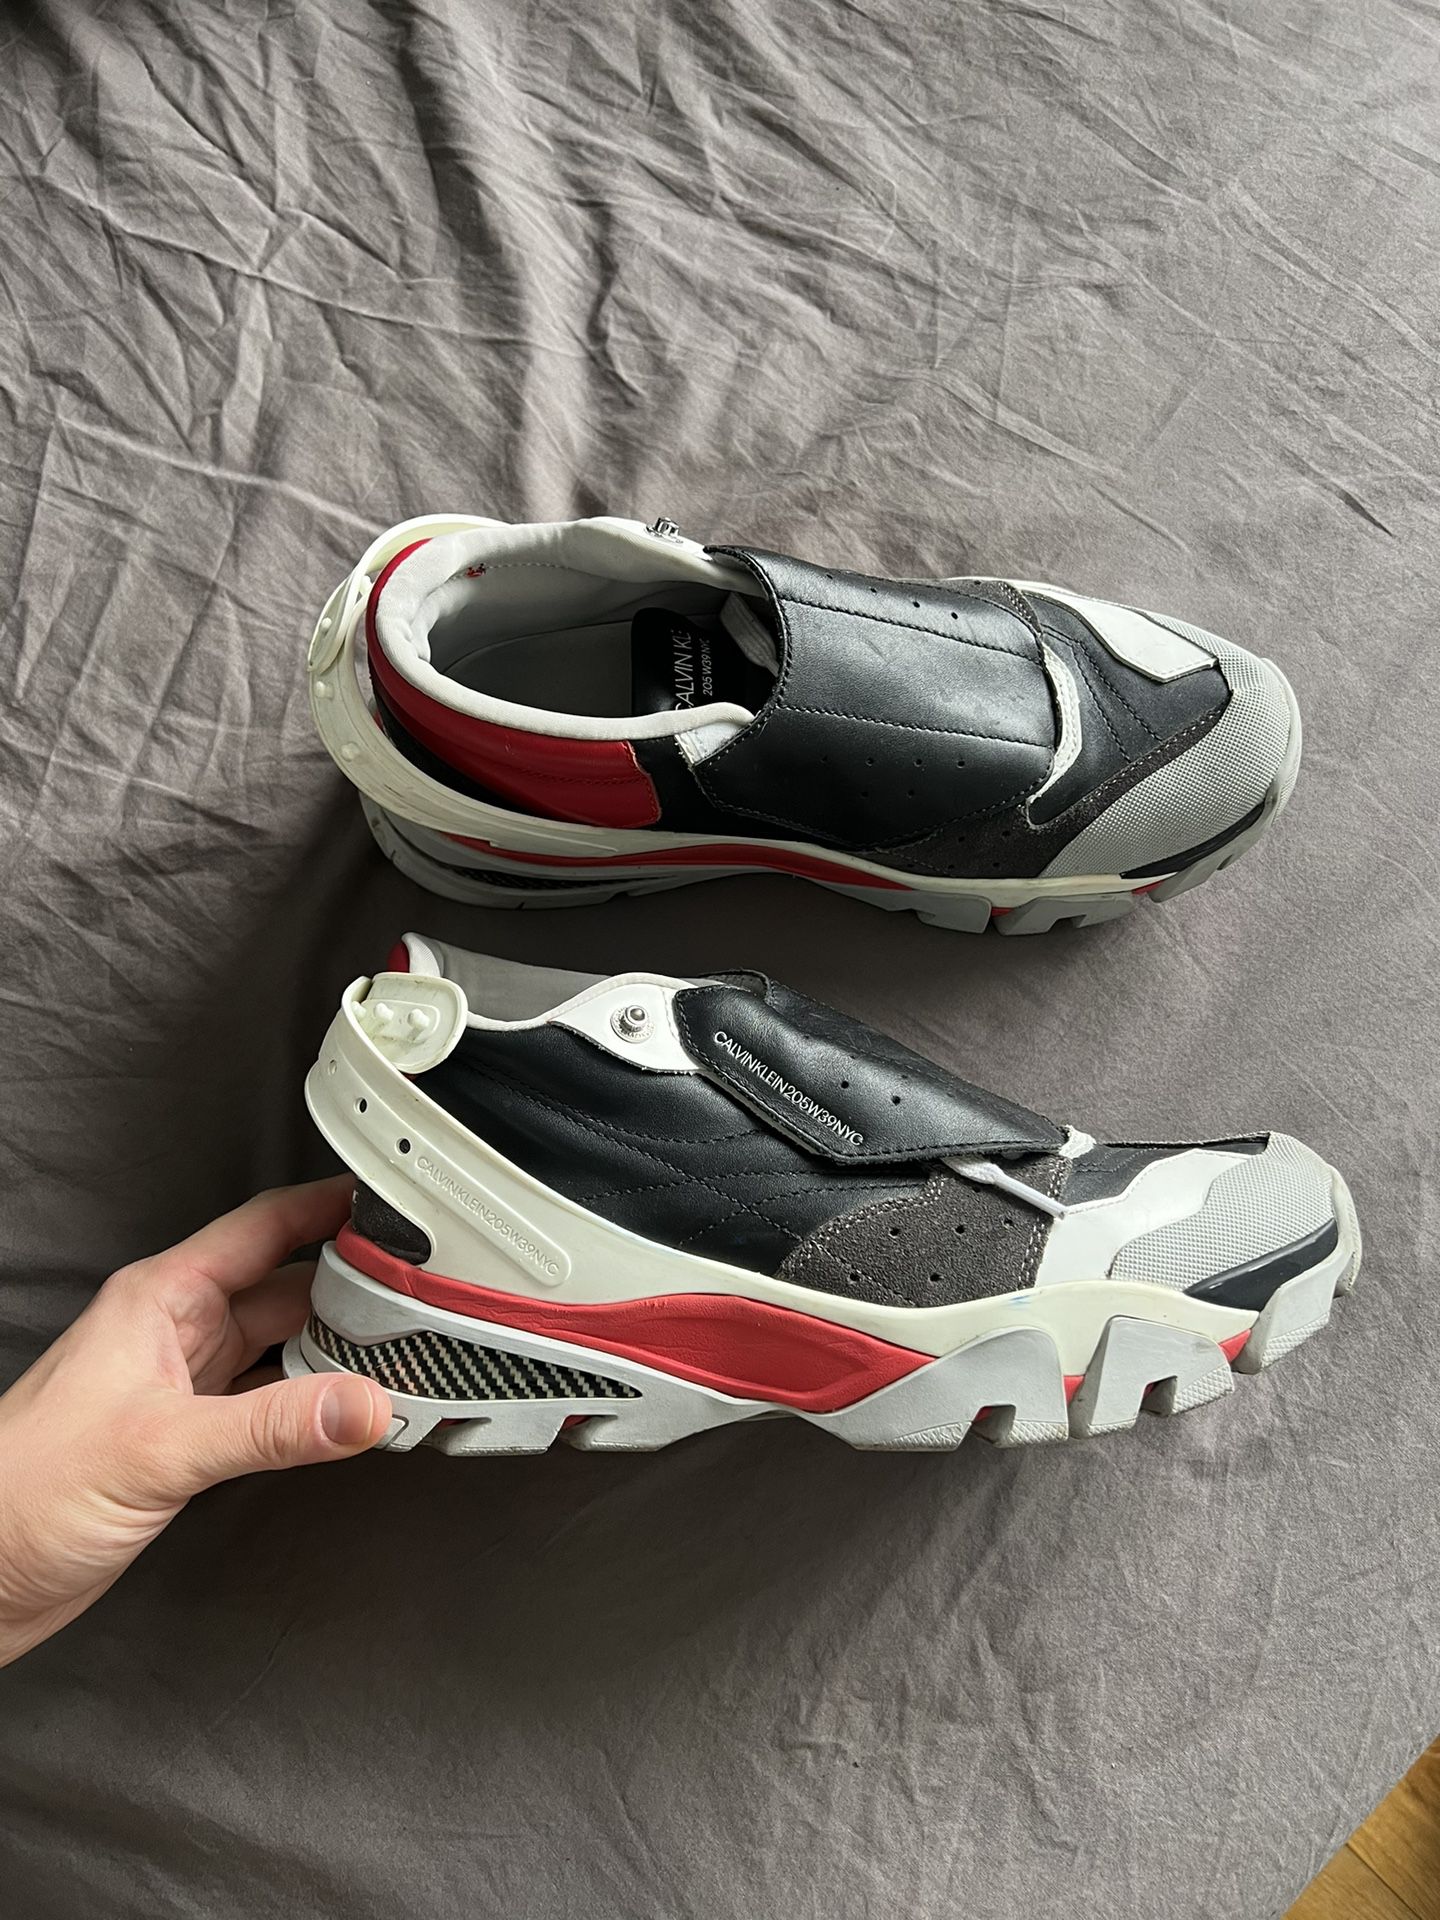 Raf / Calvin Klein 205w39NYC K0219 for Sale New York, NY - OfferUp